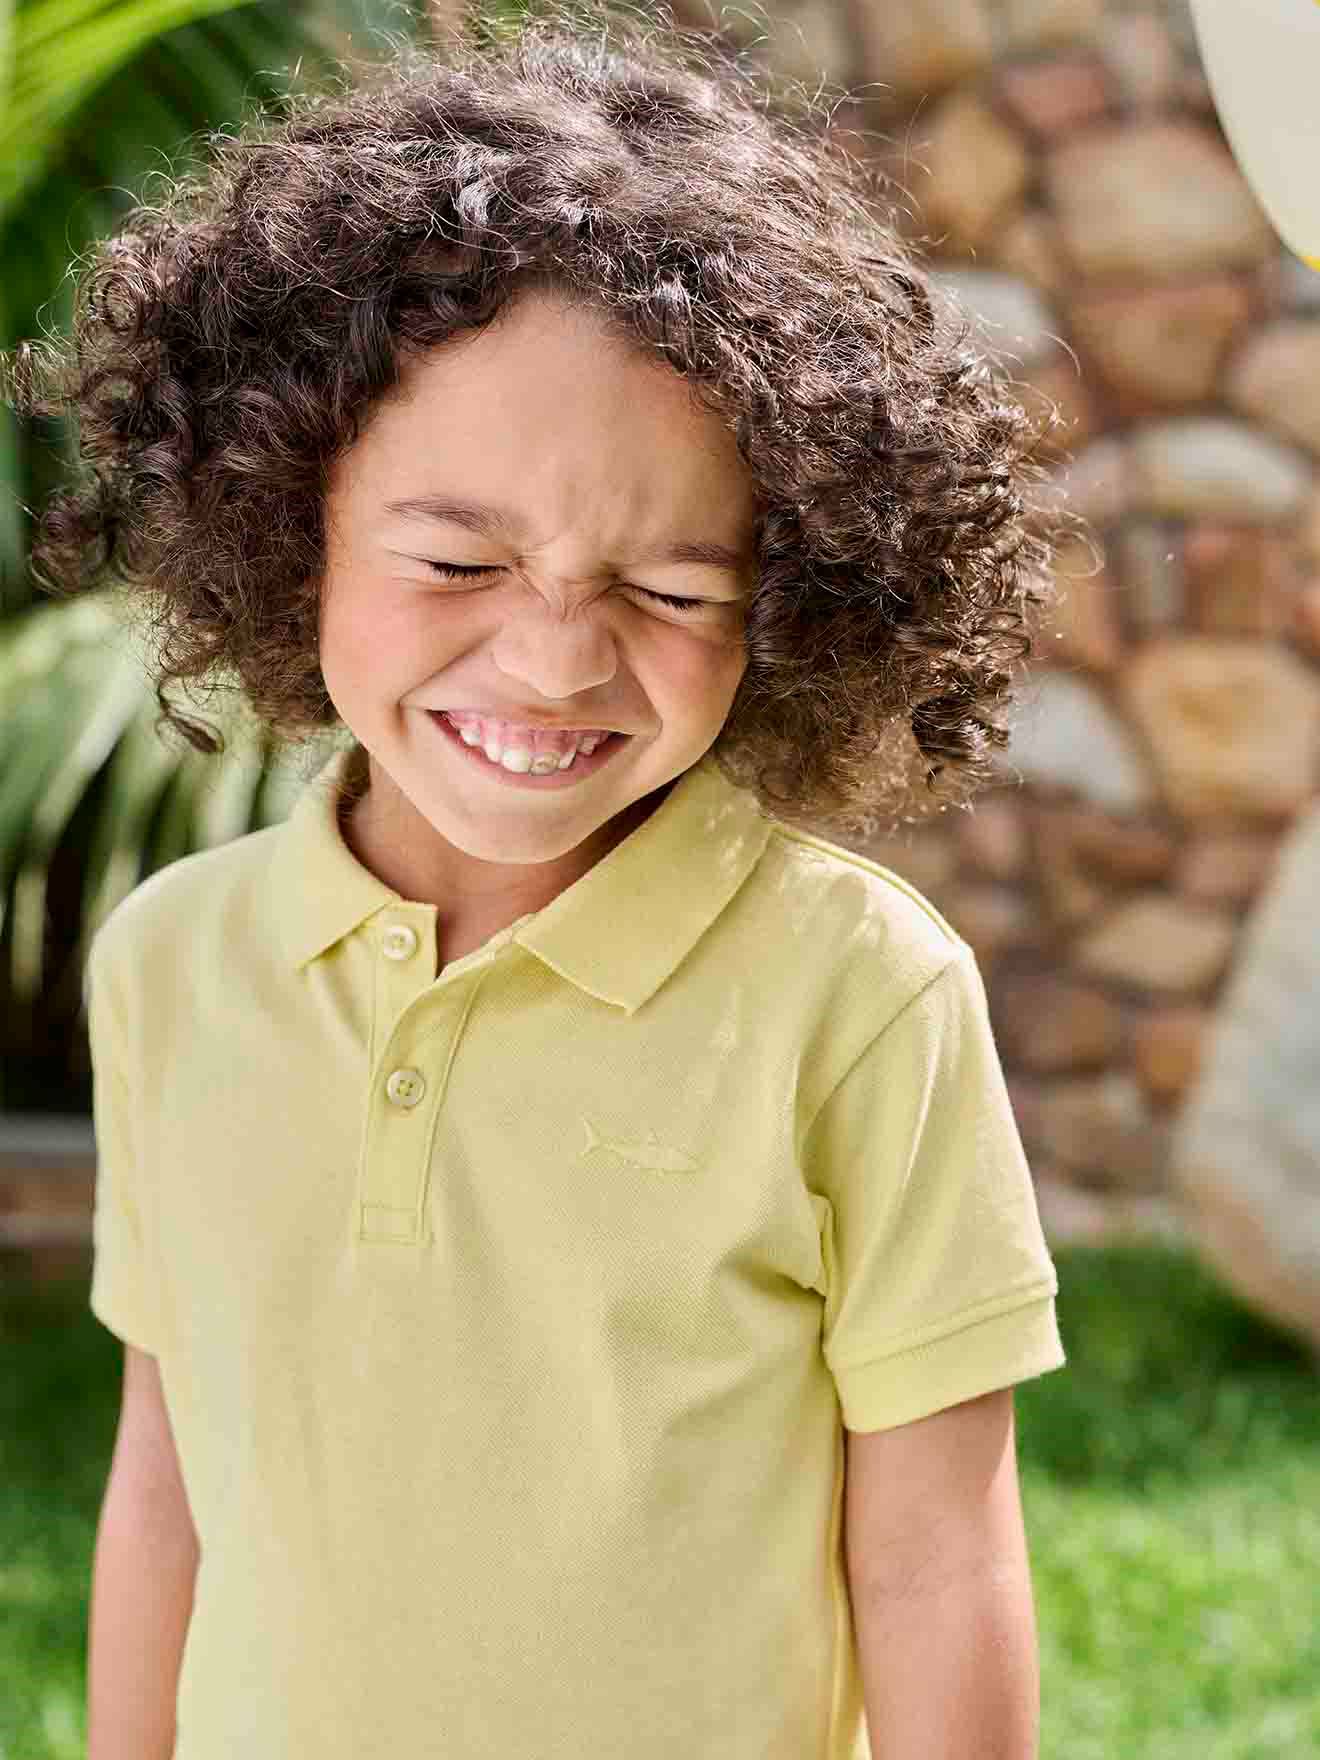 Short Sleeve Polo Shirt, Embroidery on the Chest, for Boys pastel yellow